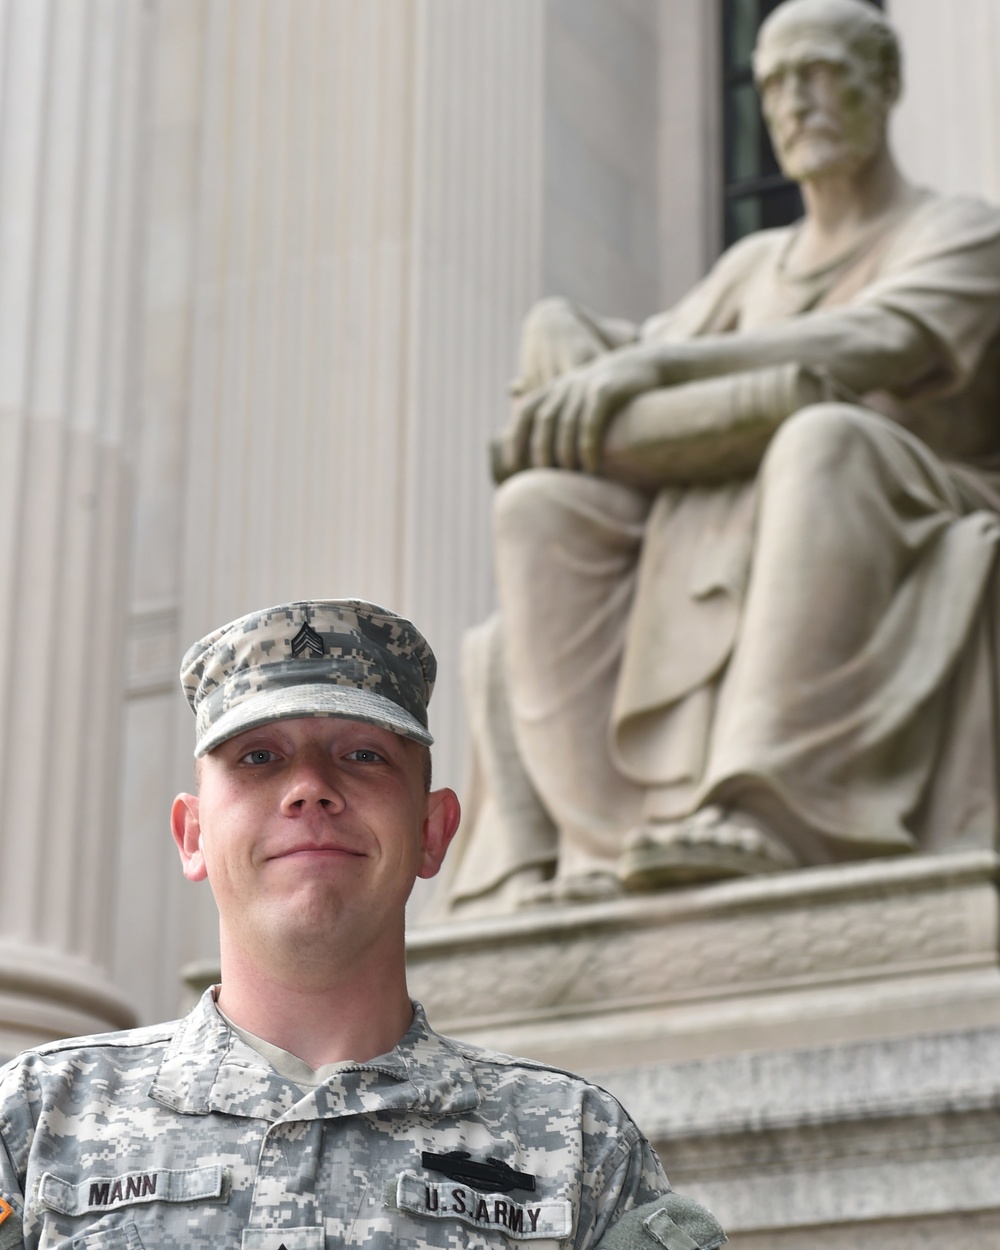 Army Sergeant Jesse Mann supports the 58th Presidential Inauguration